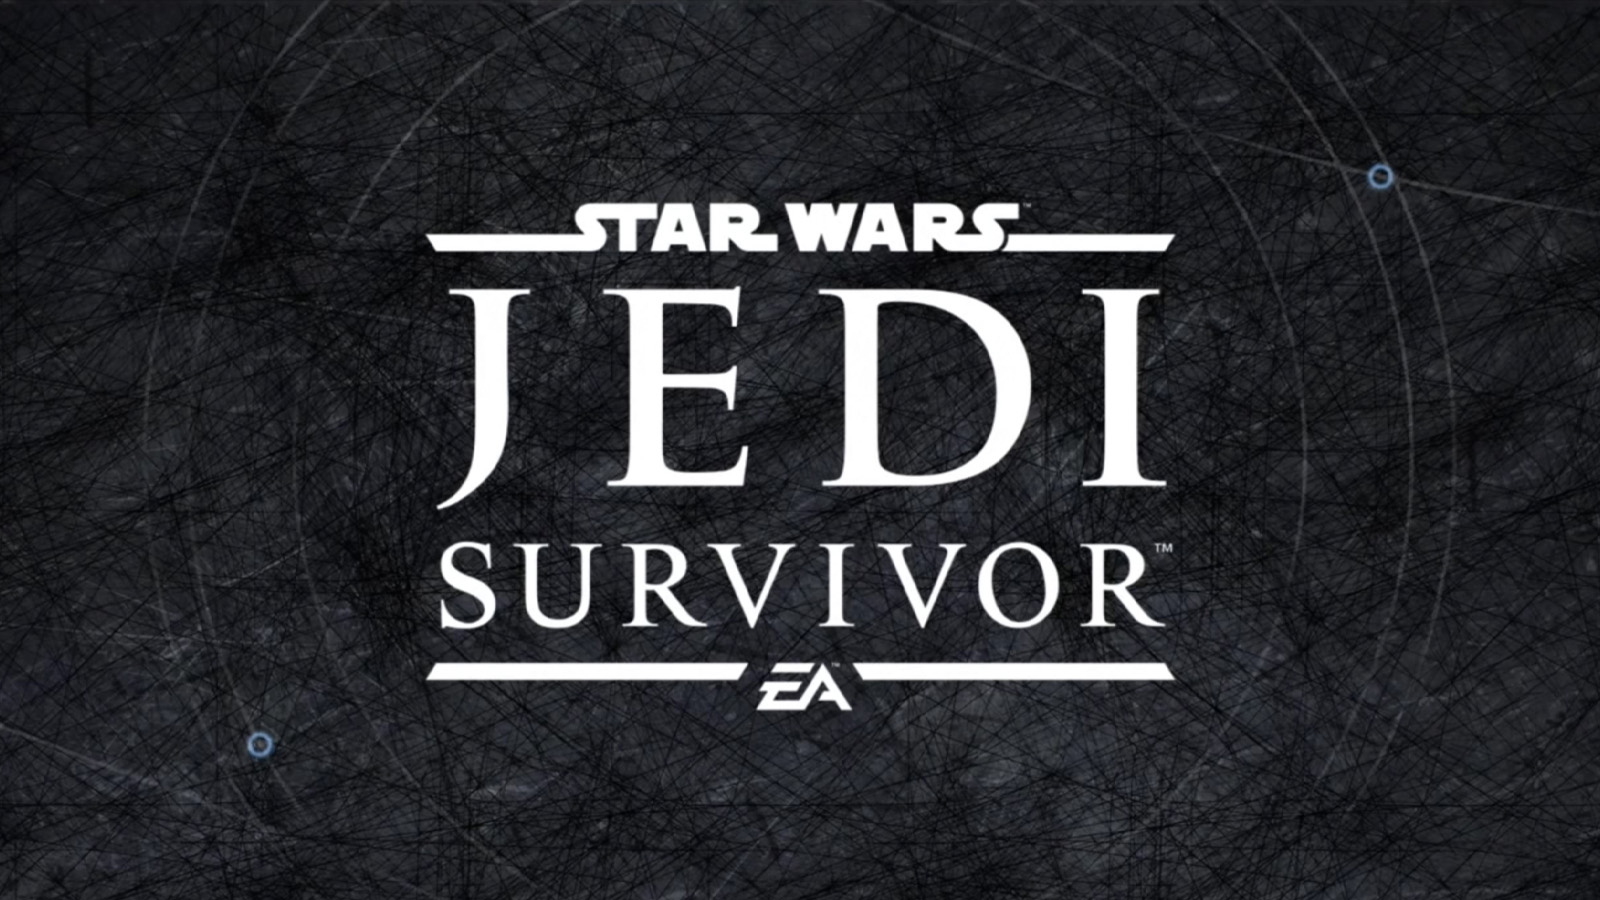 Why You Need to Play Star Wars Jedi: Survivor as a FIFA Player